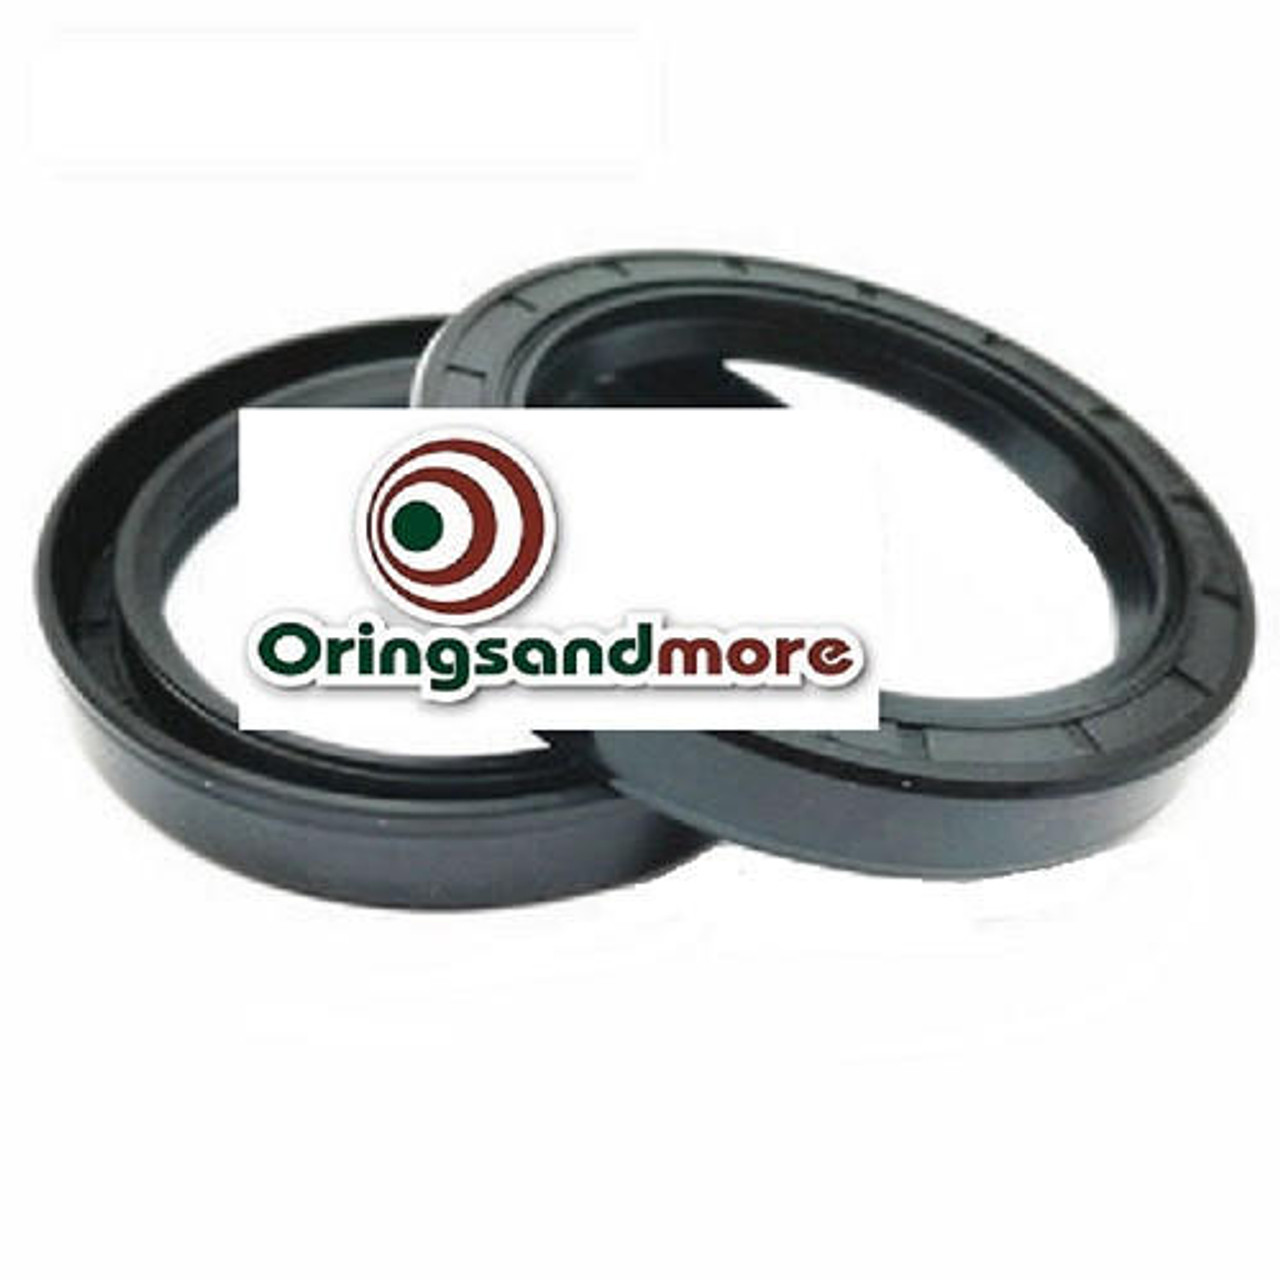 Metric Oil Shaft Seal 56 x 100 x 10mm Double Lip   Price for 1 pc